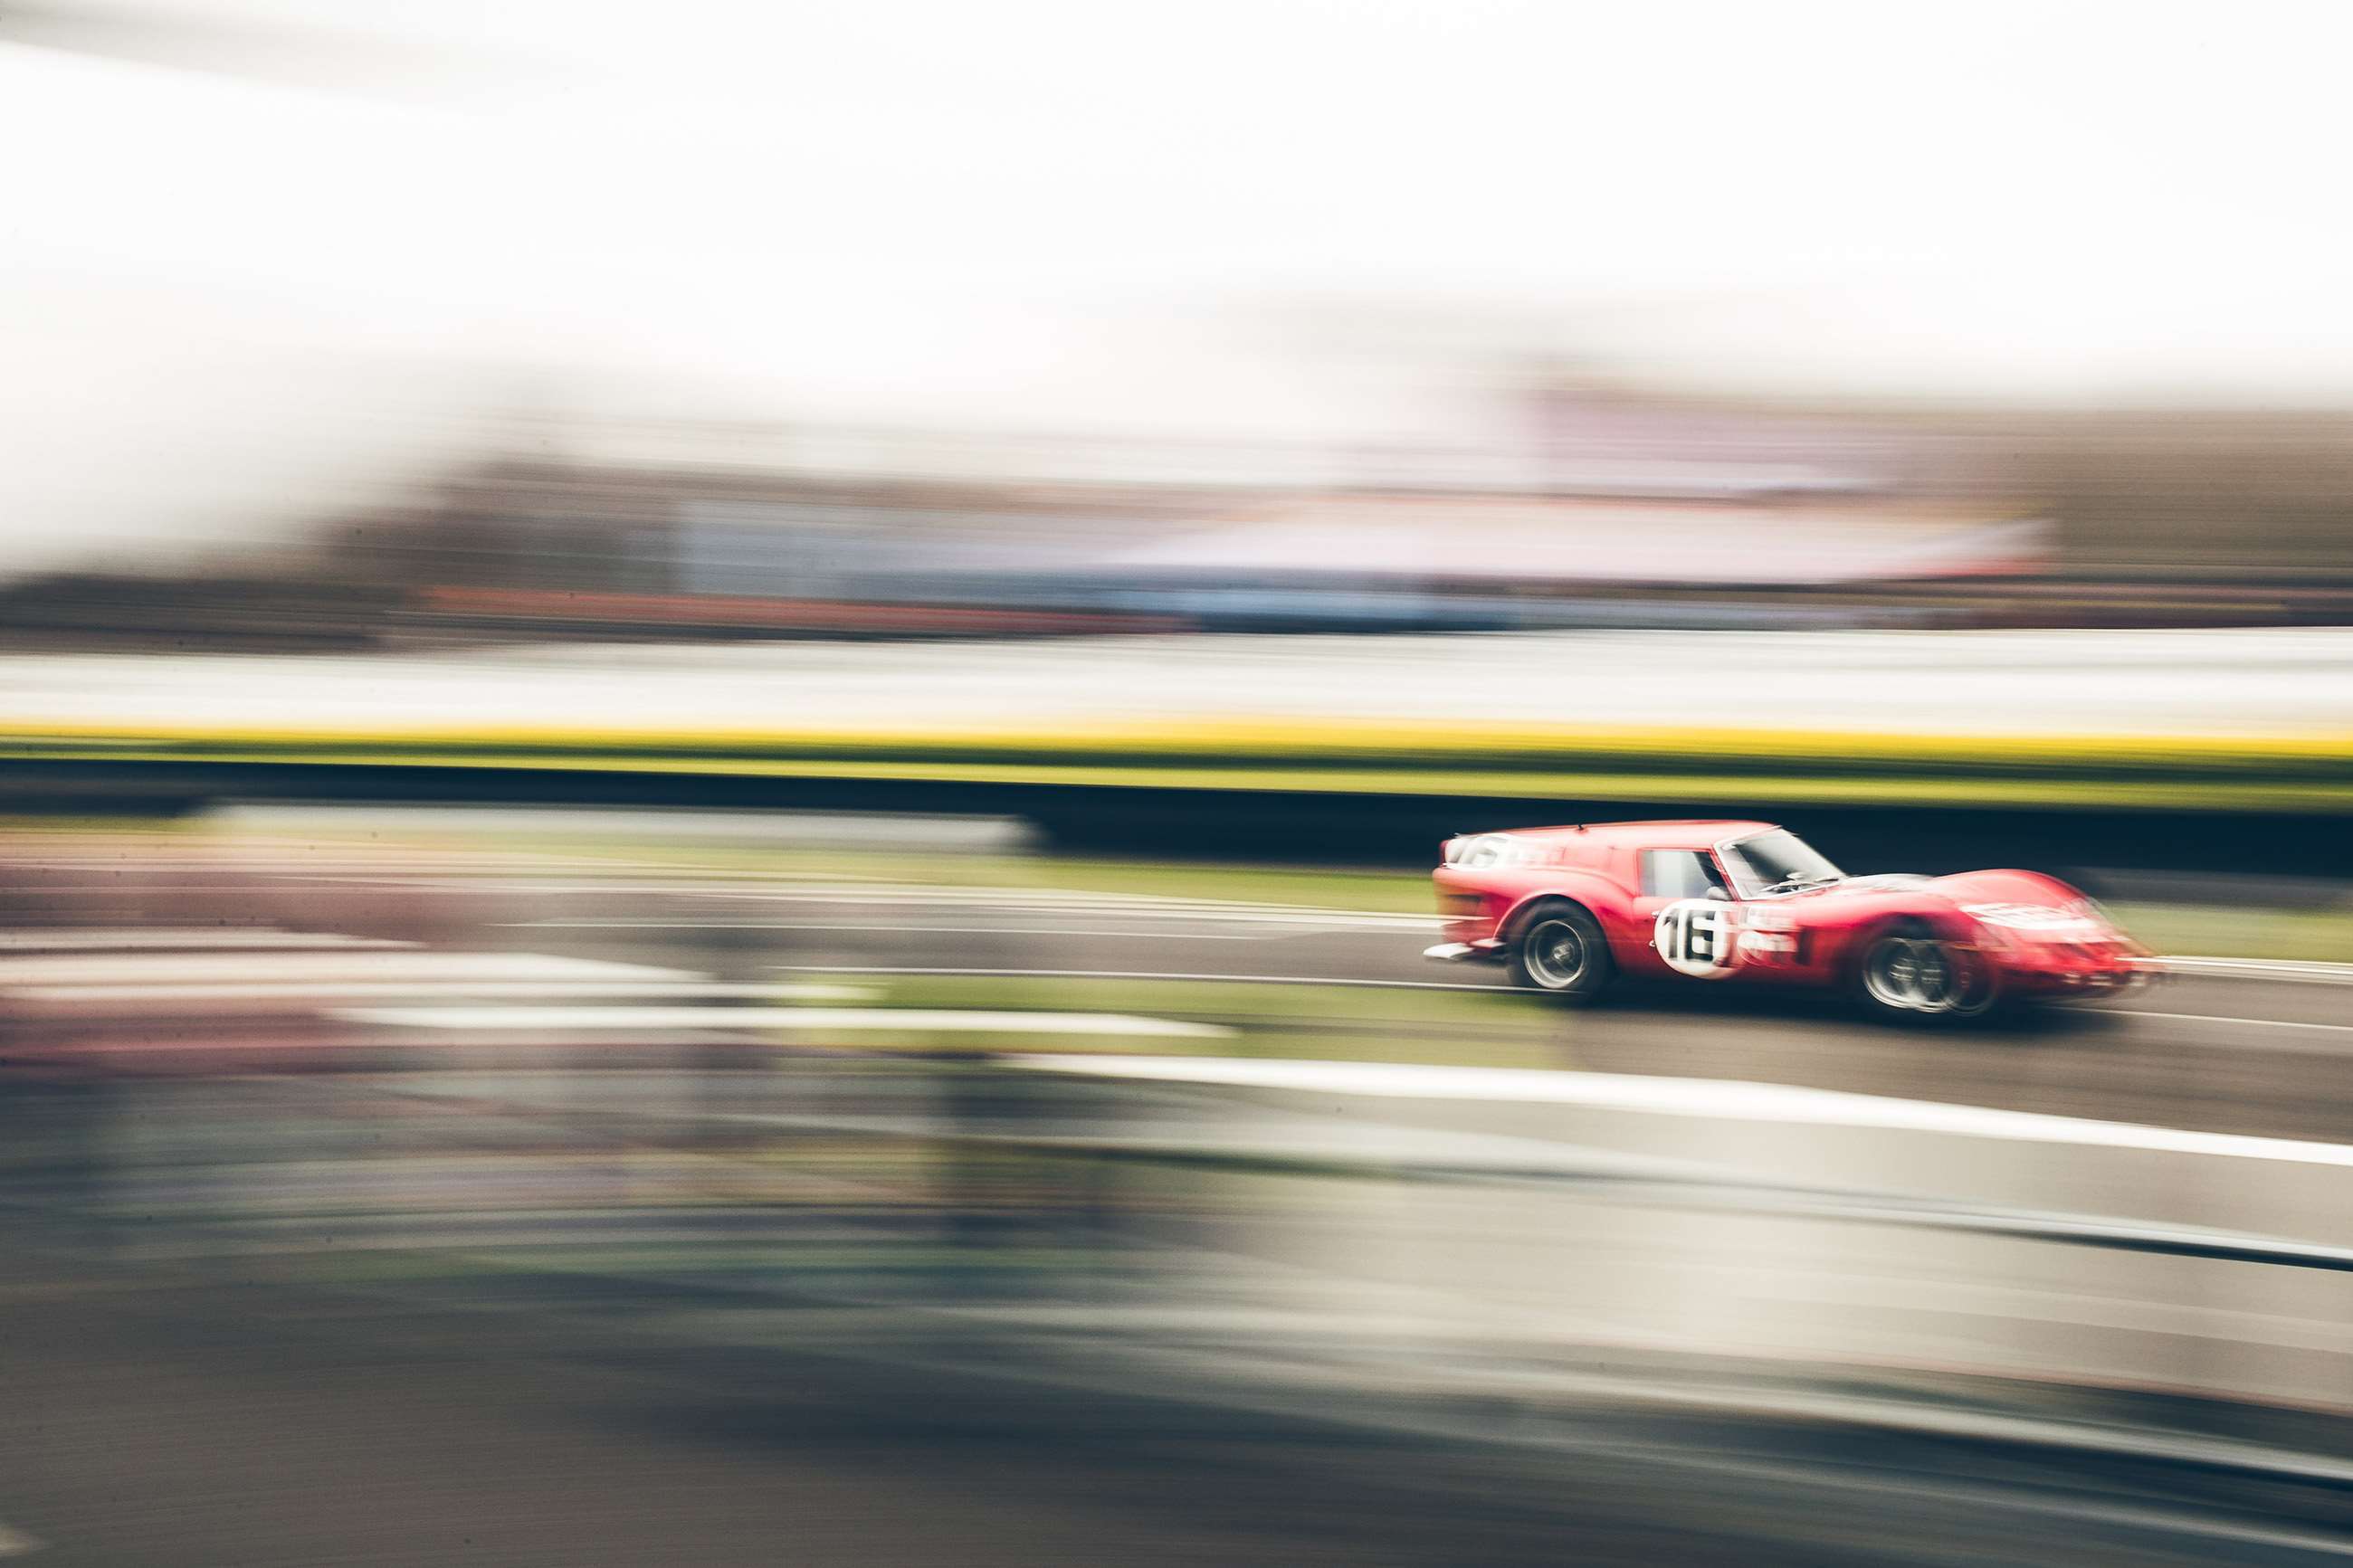 tom_shaxson_snappers_selection_goodwood_76mm_28031823.jpg